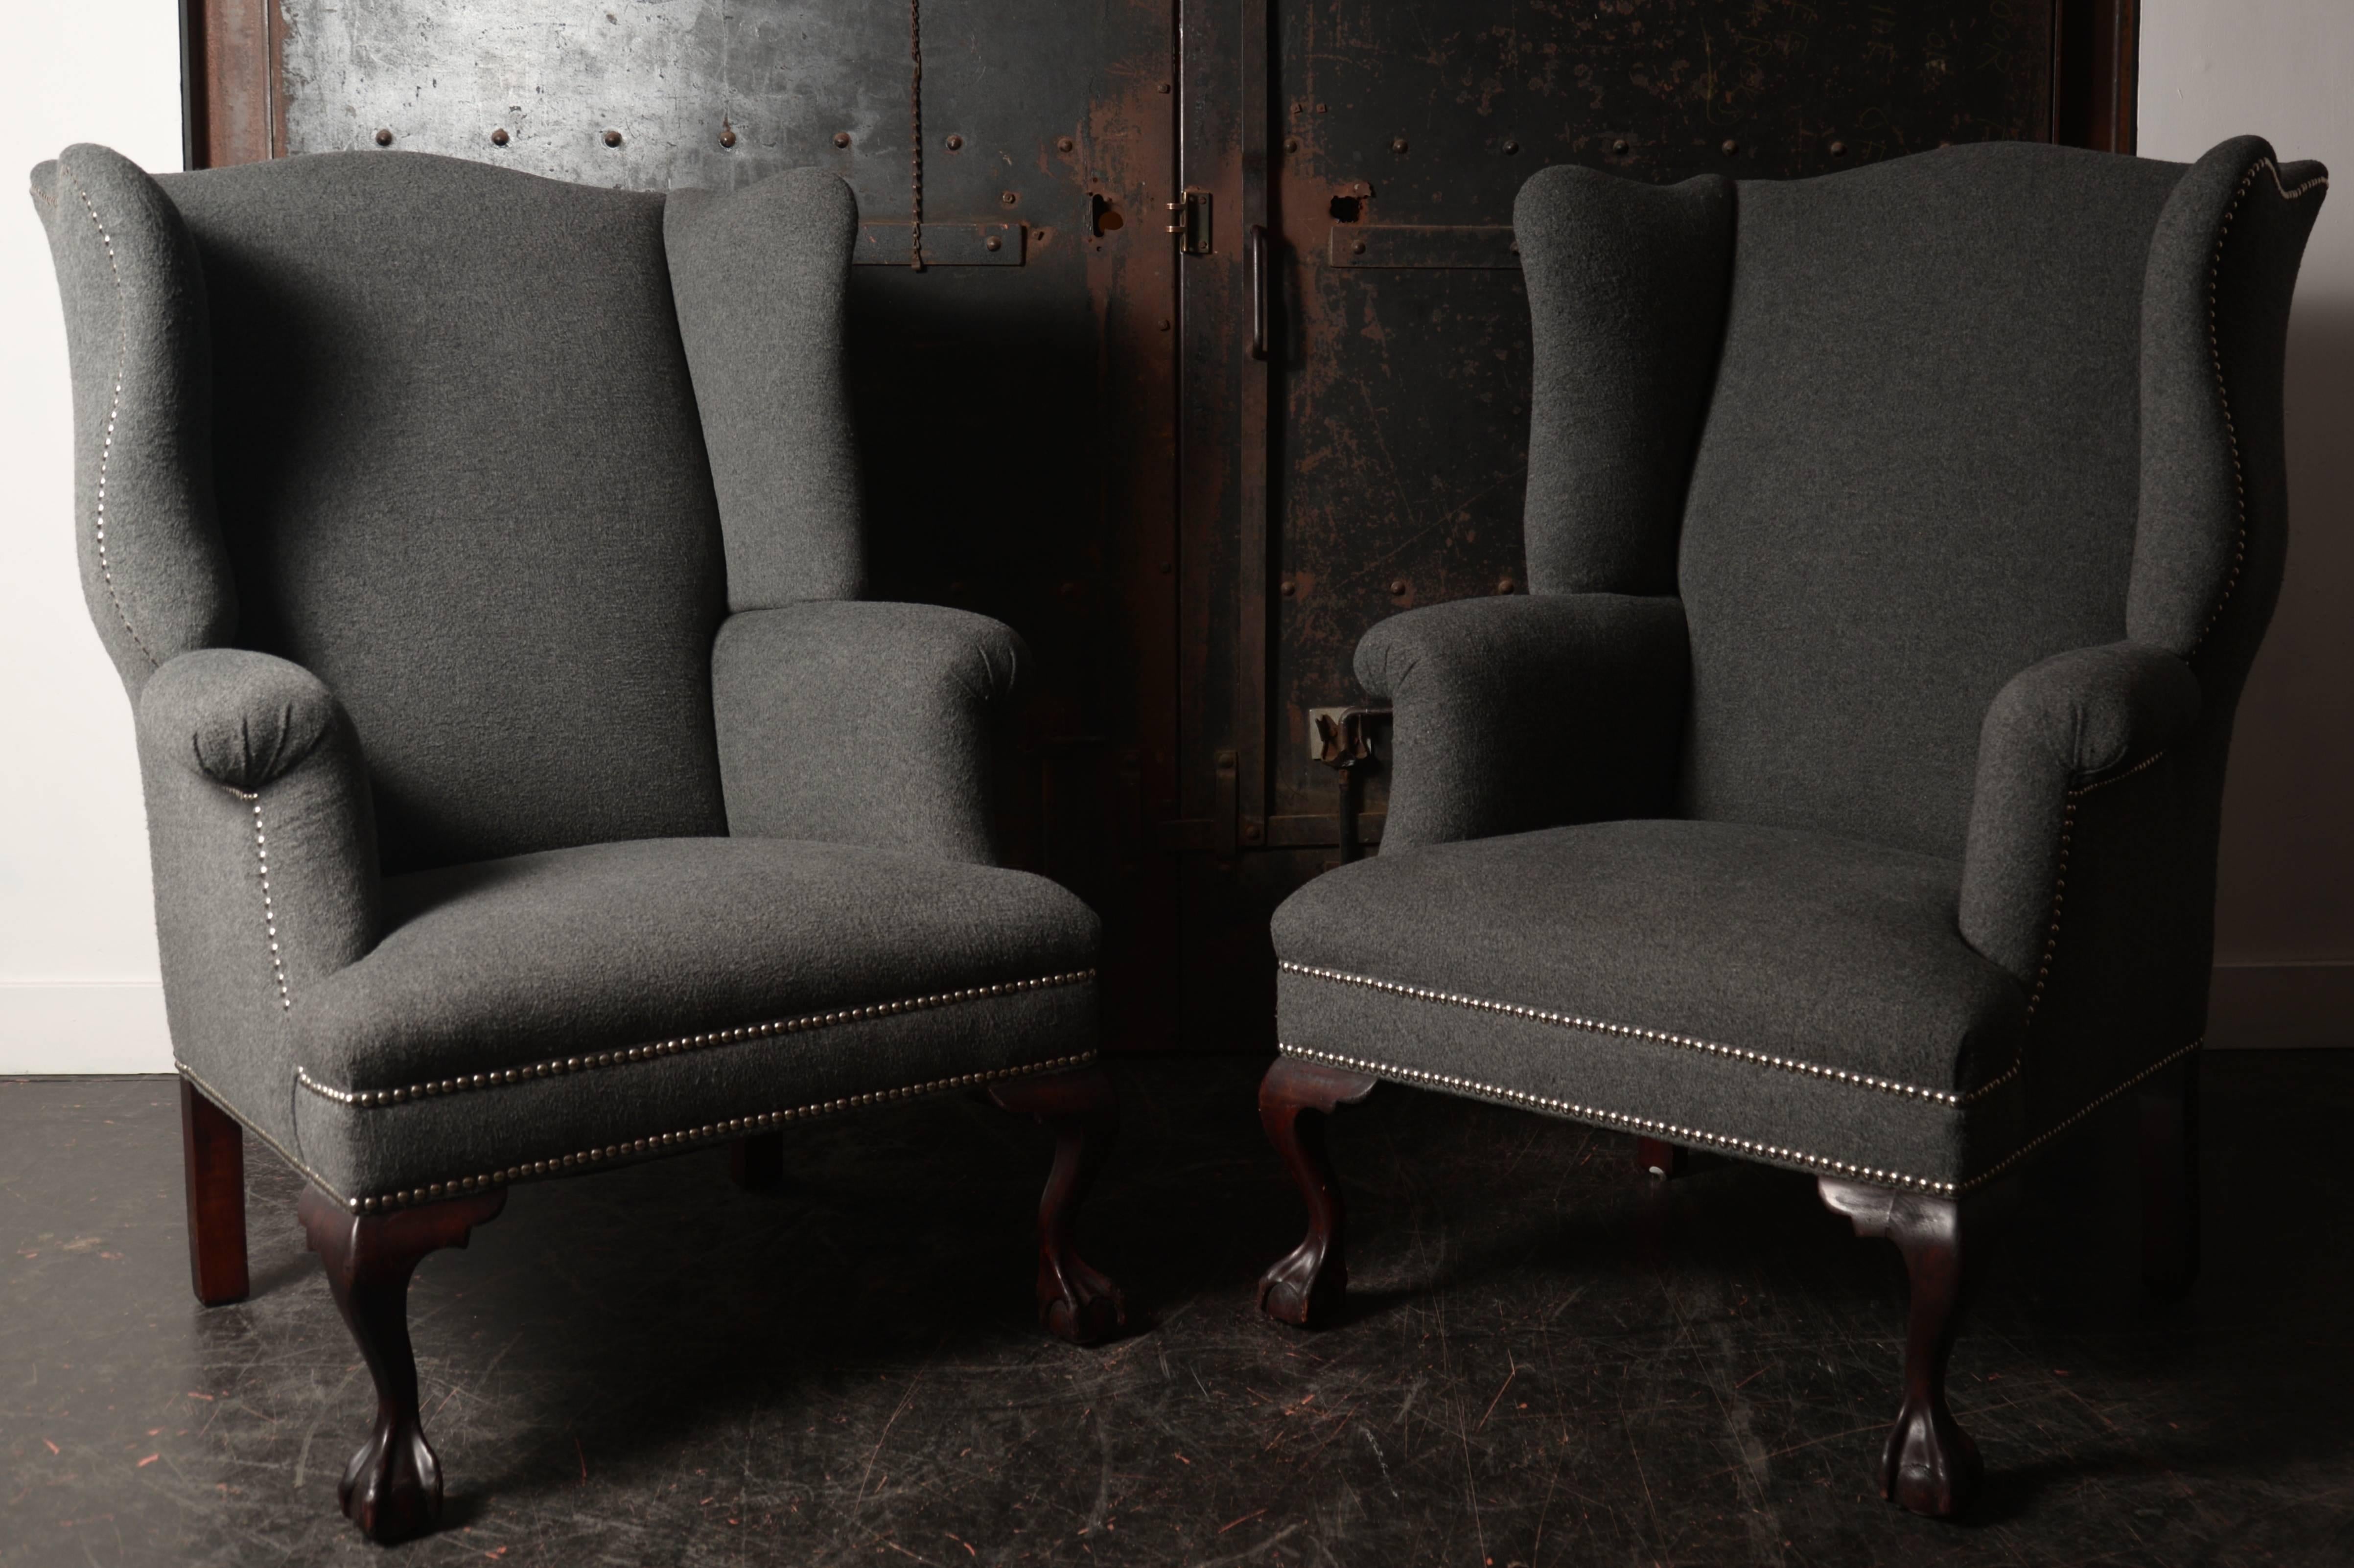 19th Century Wingback Chairs in Cashmere/Wool Blend For Sale 1